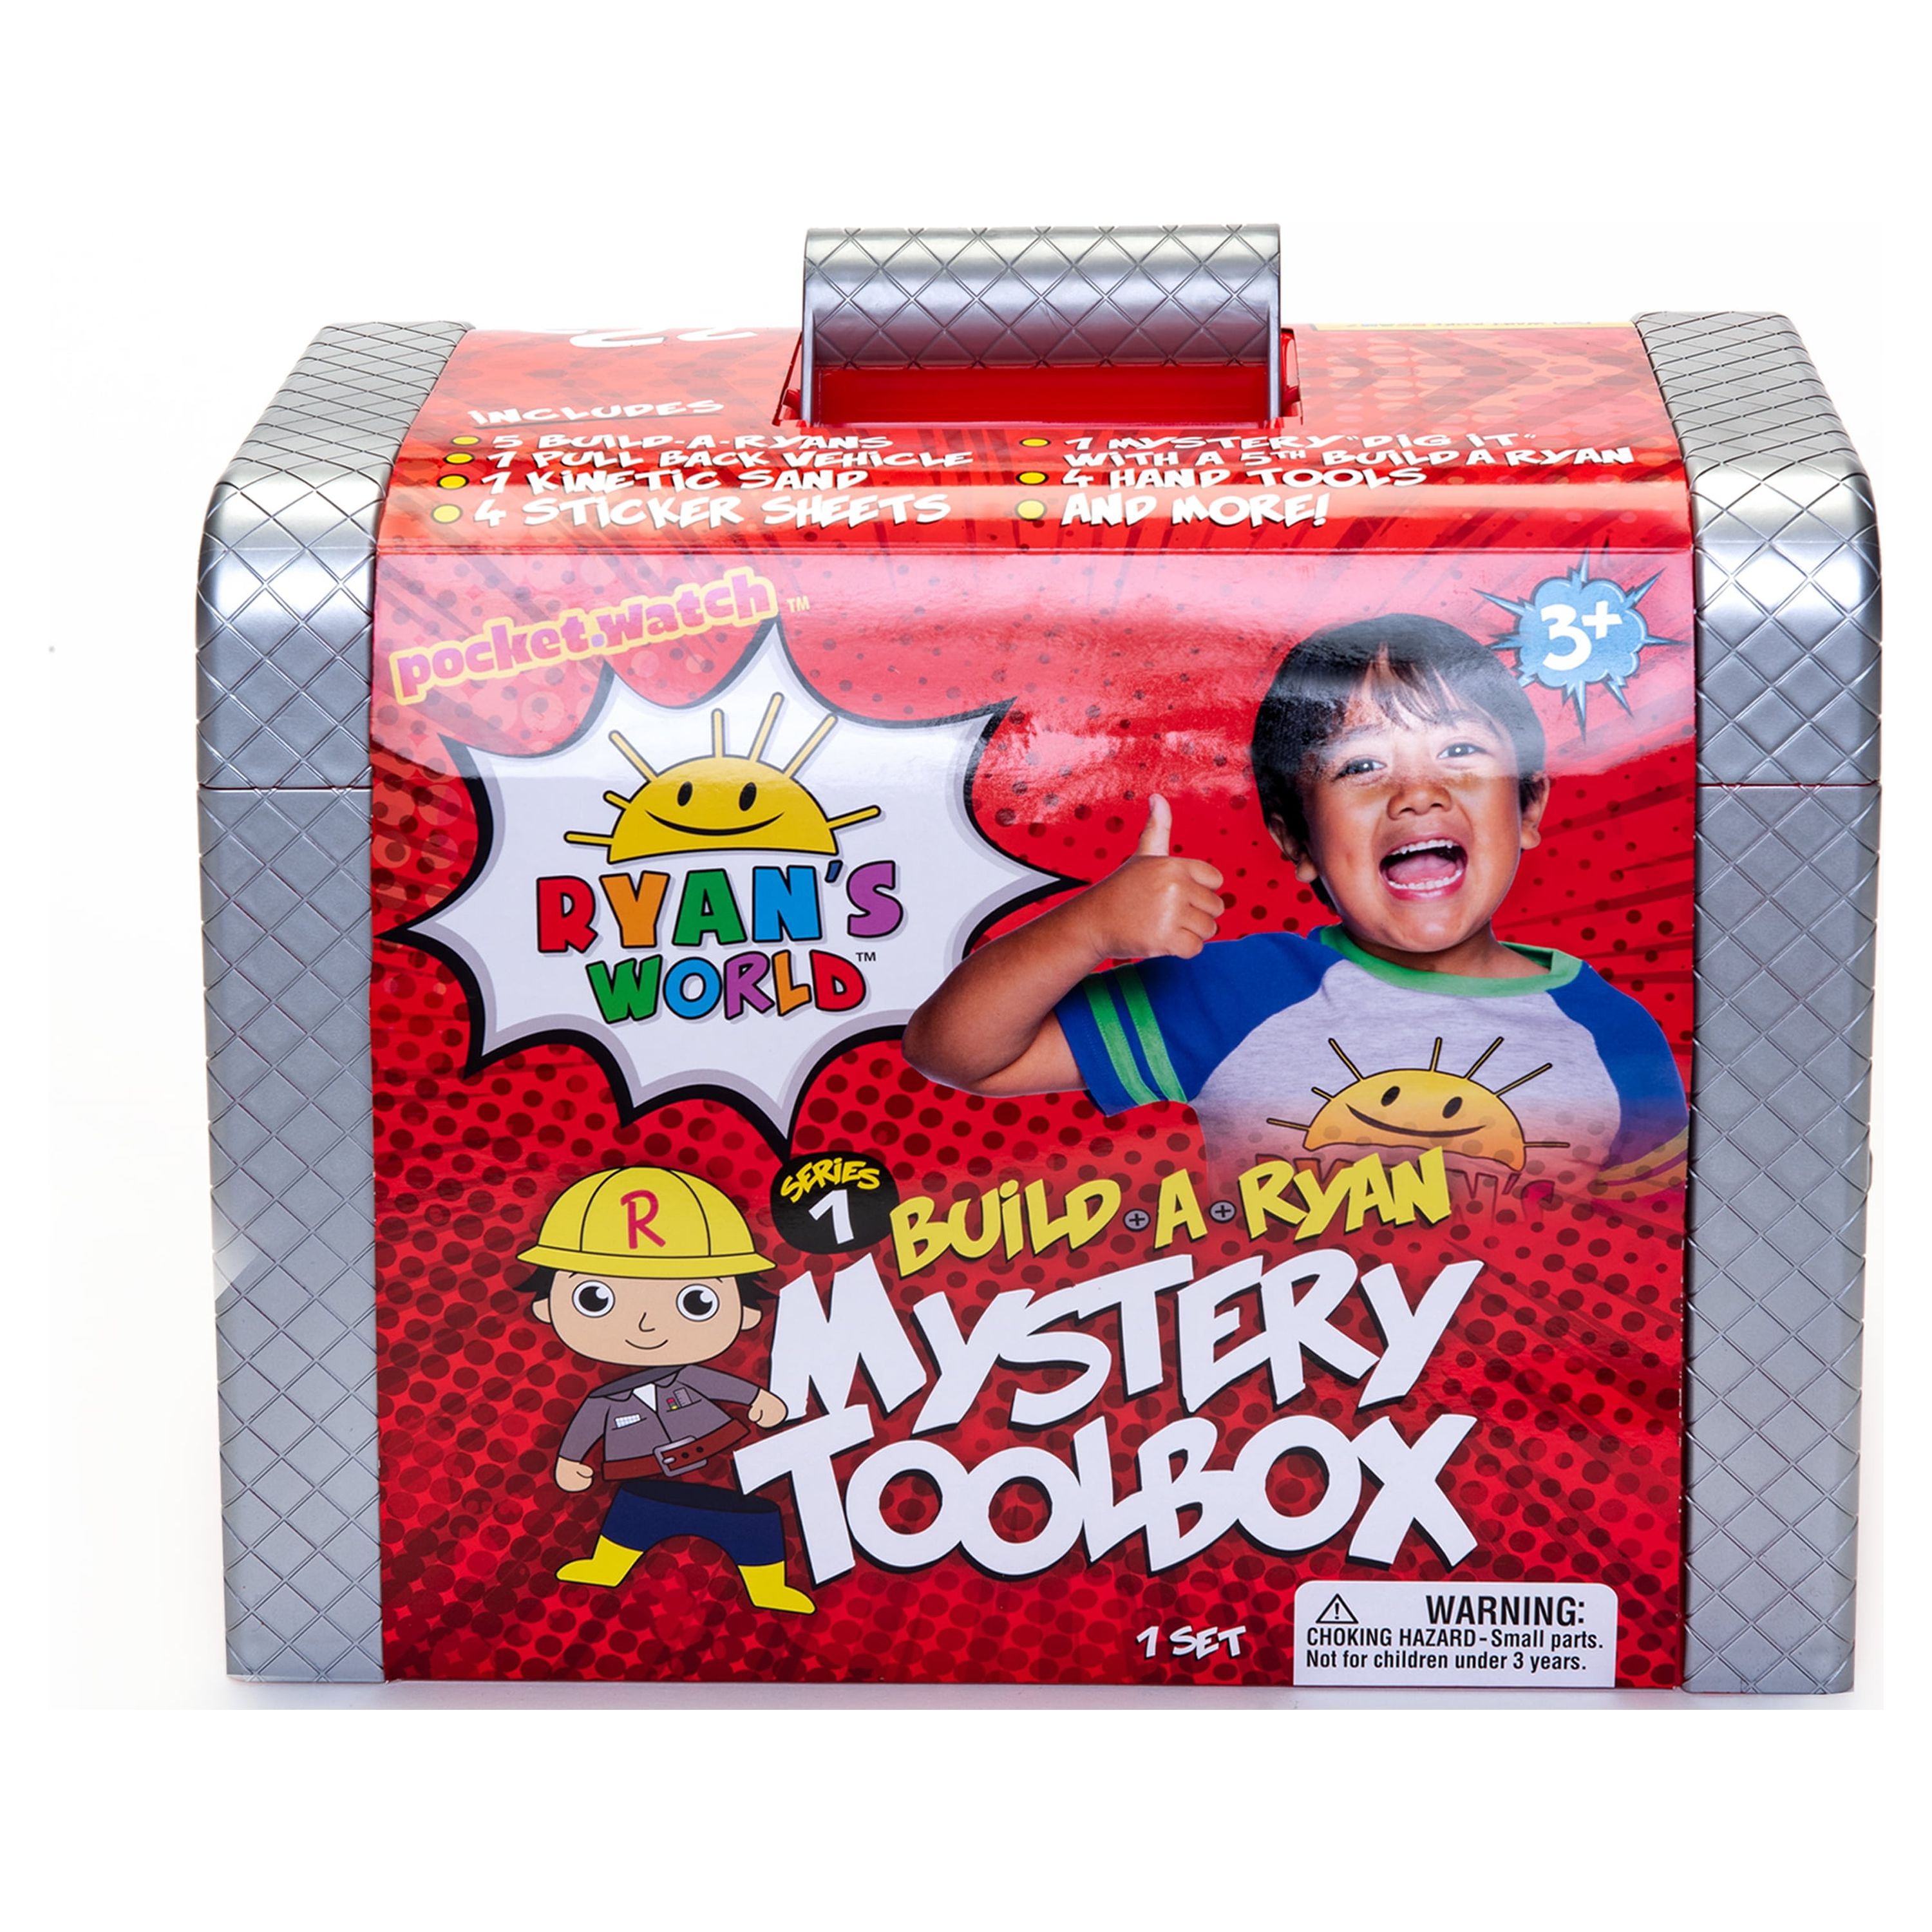 Ryan's World Build-a-Ryan Mystery Toolbox - image 1 of 7